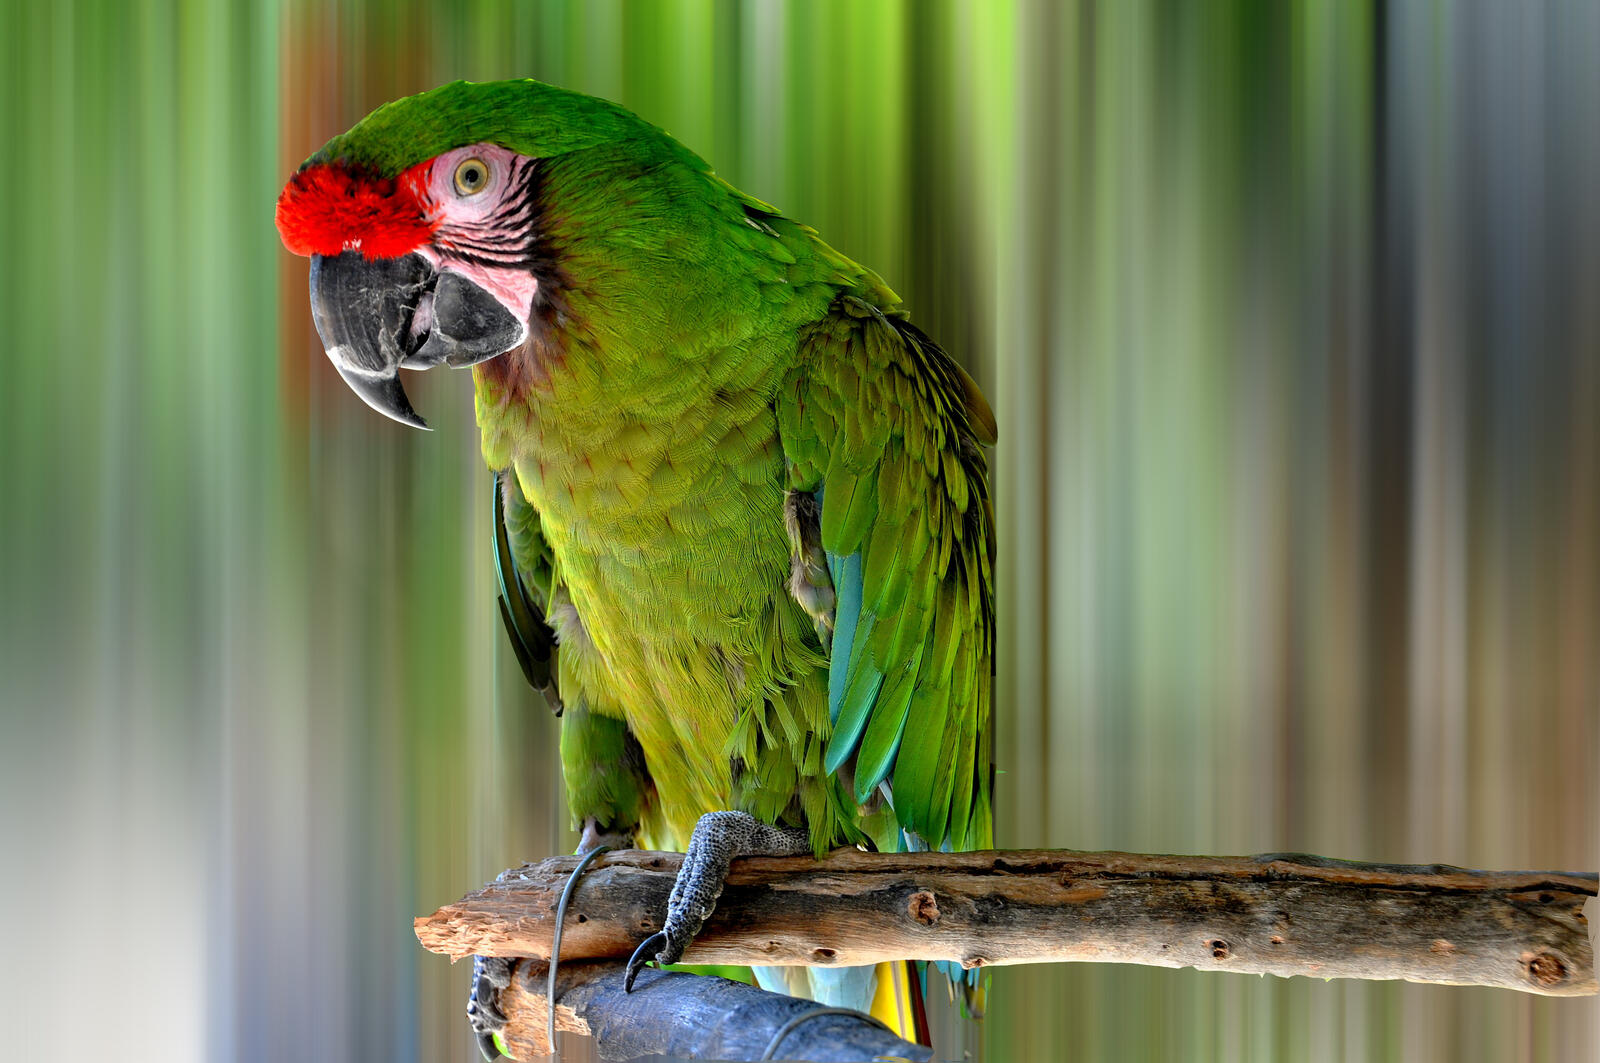 A green parrot sits on a tree branch